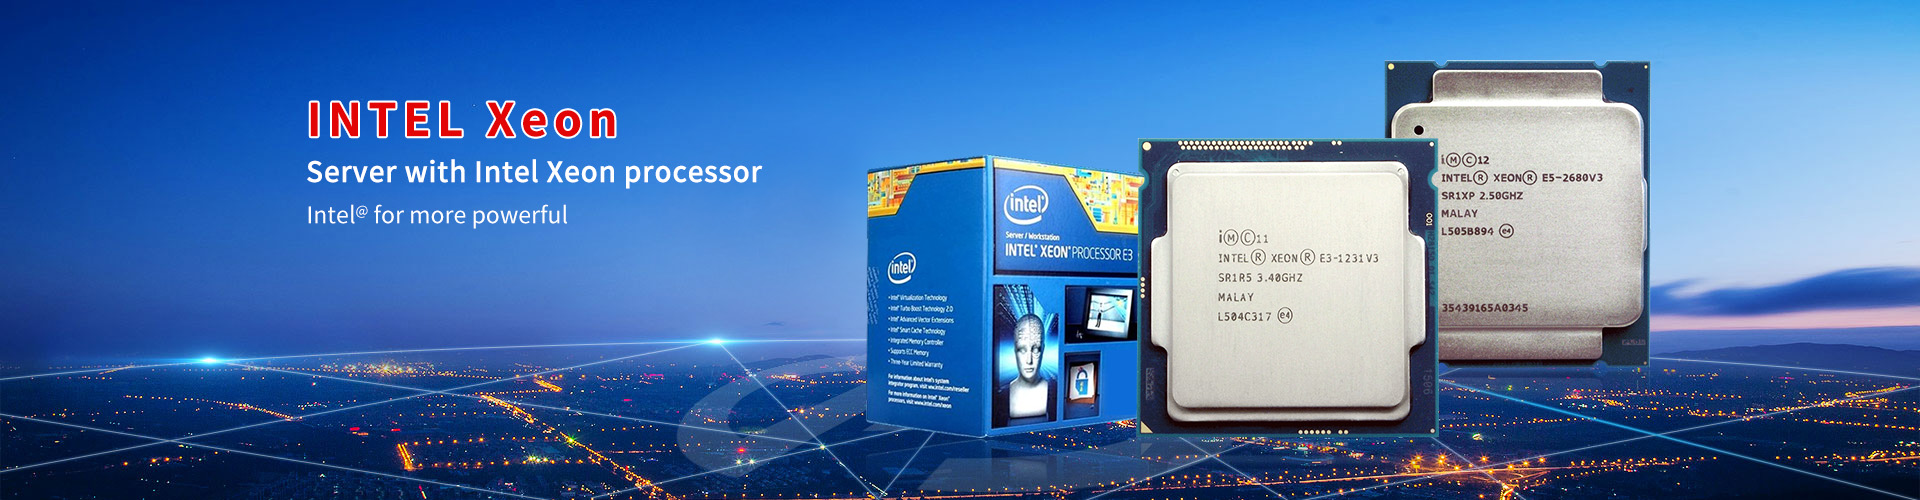 Server with Intel Xeon processor; Intel @ for more powerful